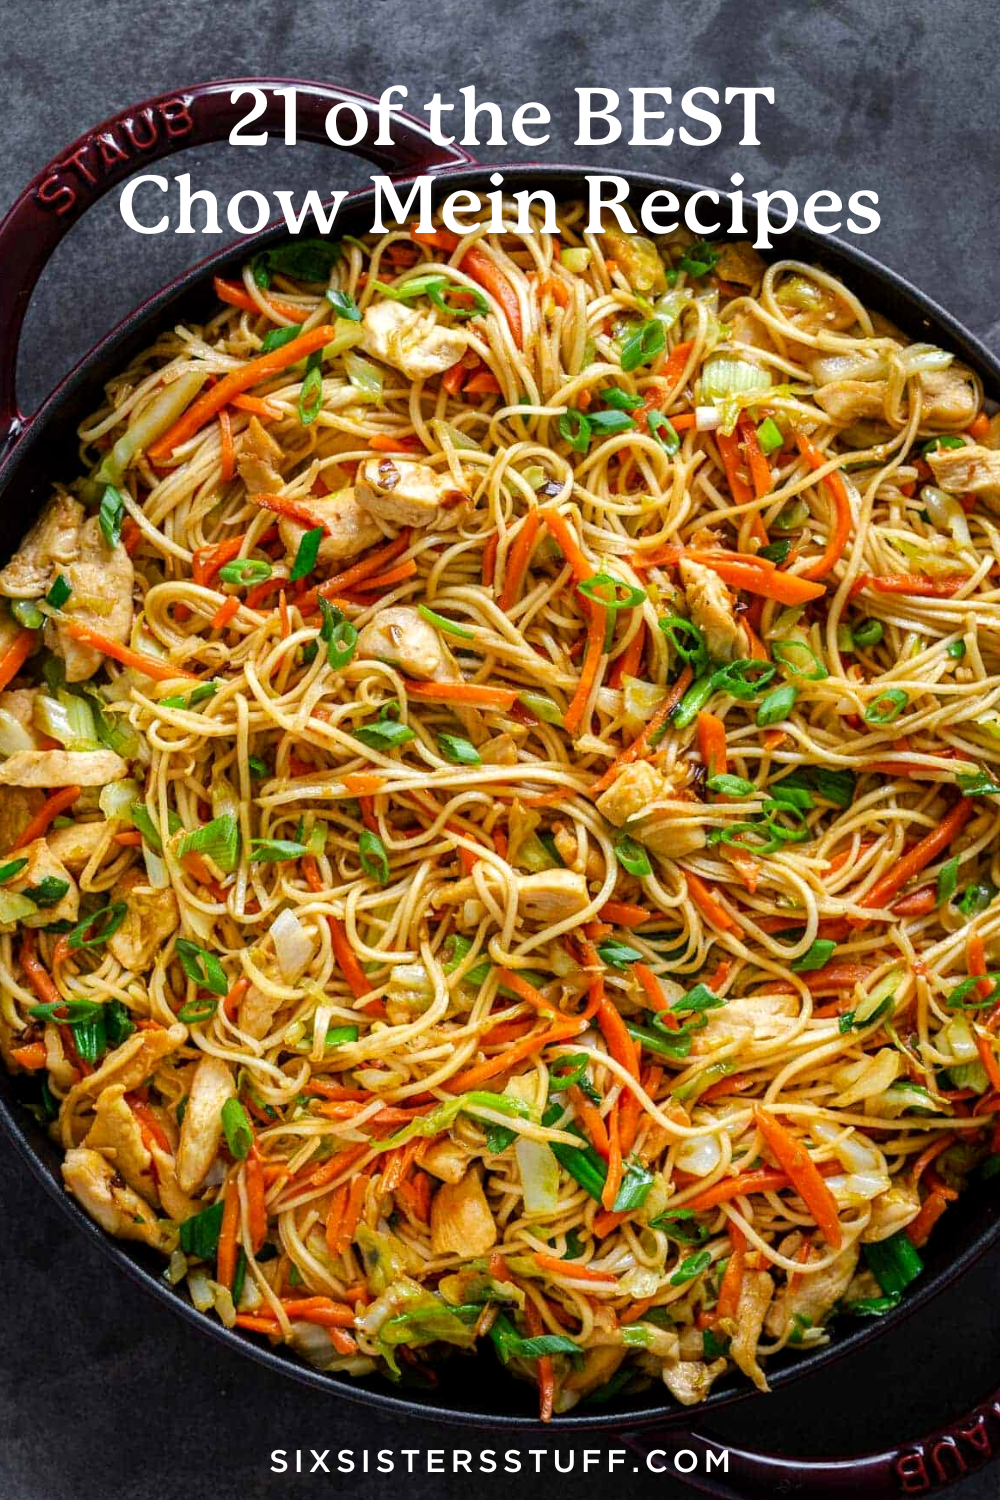 21 of the BEST Chow Mein Recipes